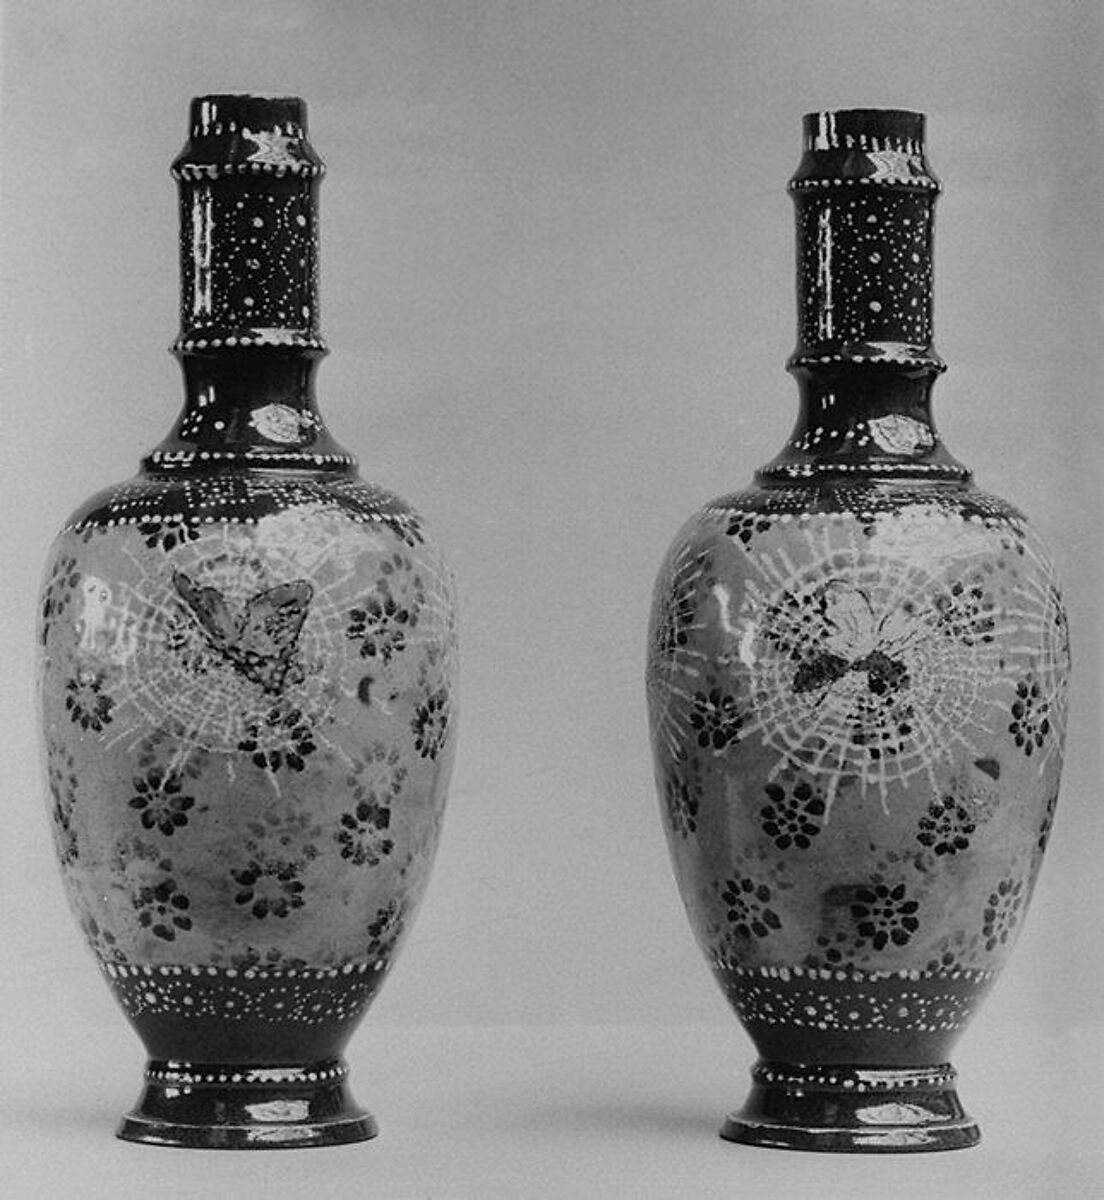 Pair of vases, Stoneware, French, Limoges 